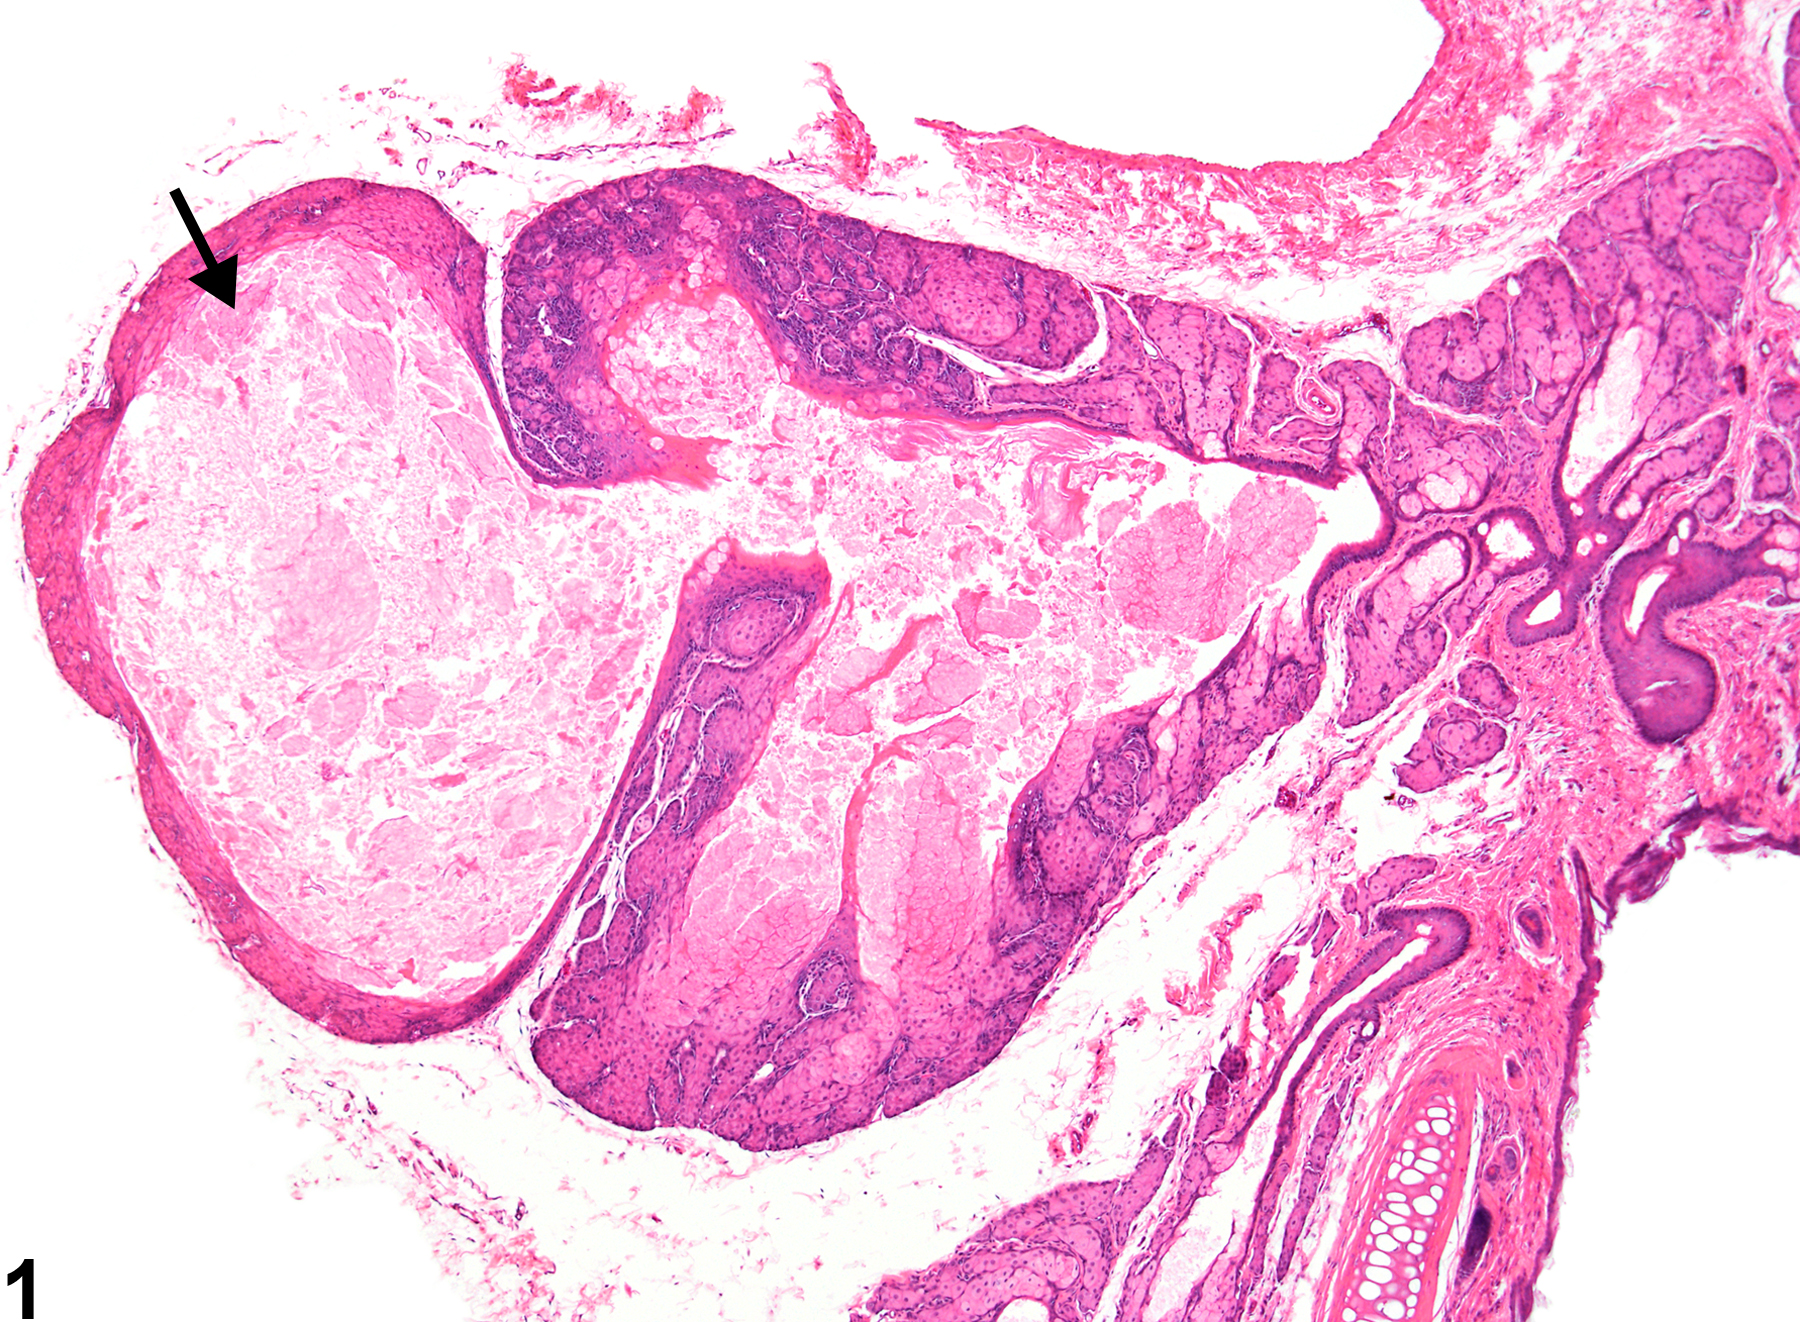 Image of duct cyst in the Zymbal's gland from a female F344/N rat in a chronic study